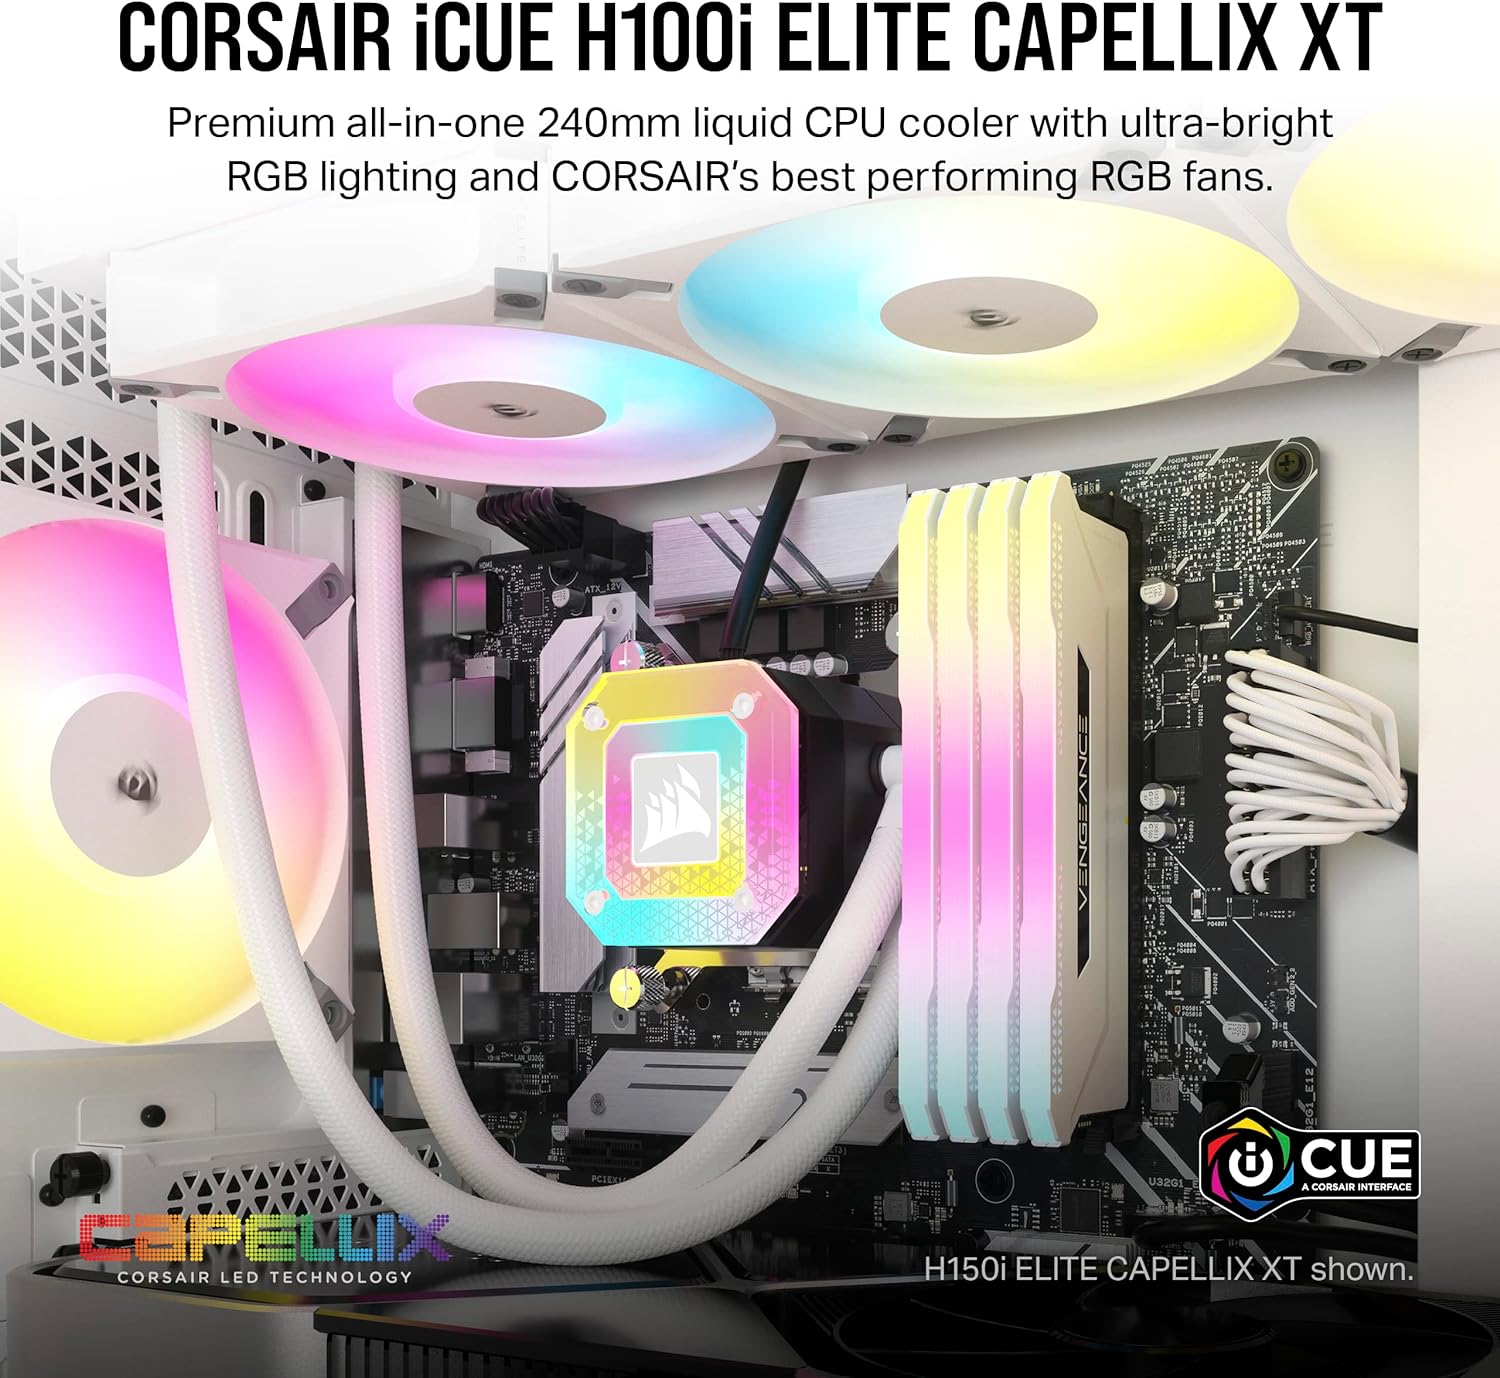 Dual AF120 RGB Fans - Corsair iCUE H100i Elite Liquid CPU Cooler - White - High-performance cooling solution for Intel and AMD CPUs. 0840006683513